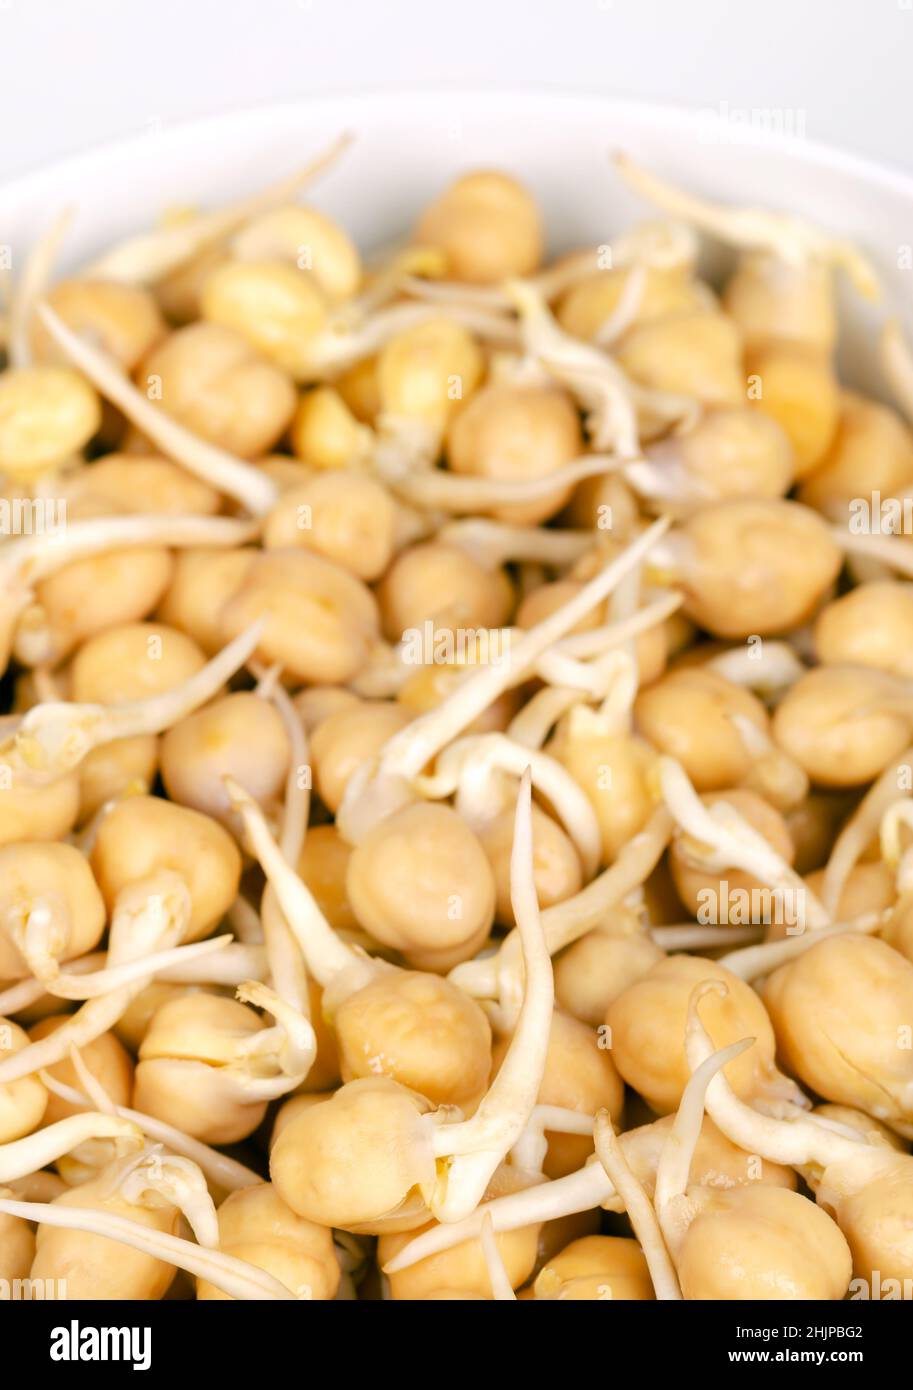 Chickpea sprouts, in a white bowl, close up, front view. Ready to eat, sprouted chickpeas, seeds of Cicer arietinum, a legume and protein source. Stock Photo